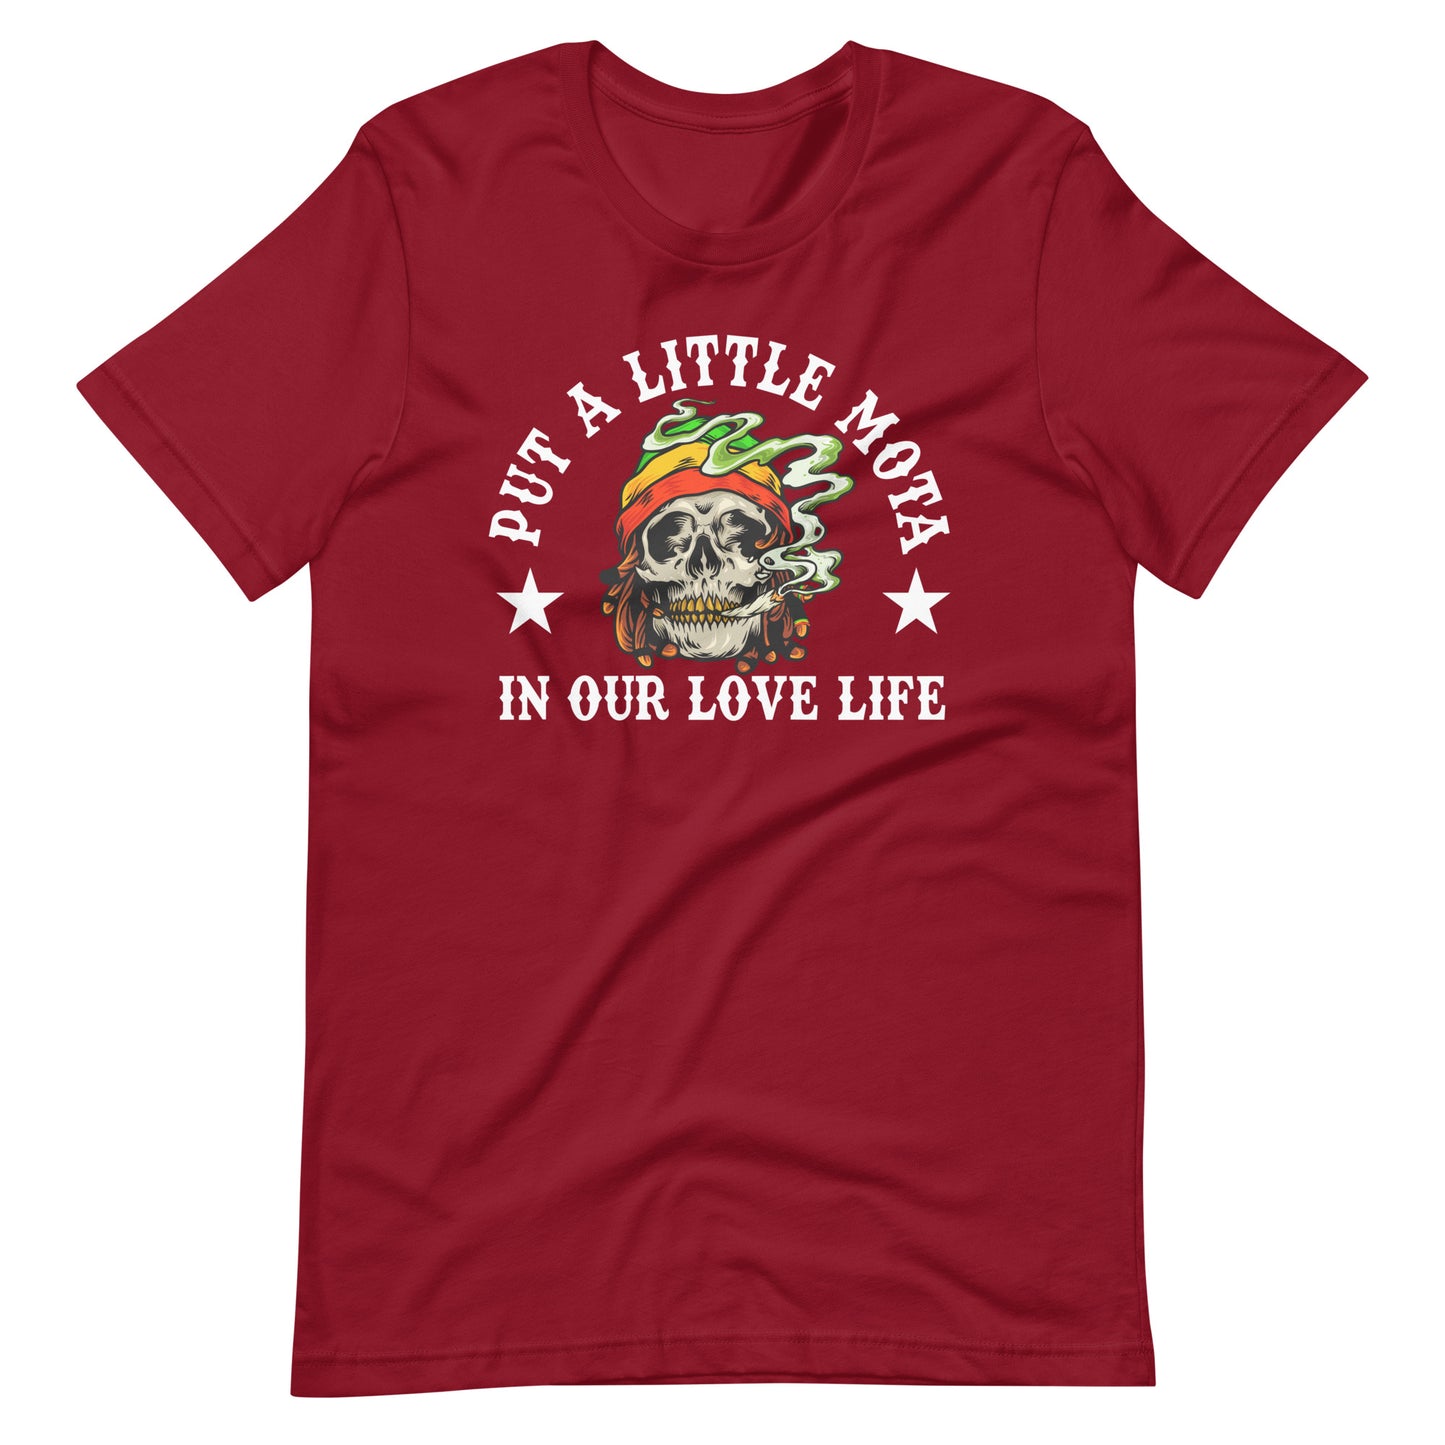 "Put a Little Mota in Our Love Life" La Bamba T-Shirt